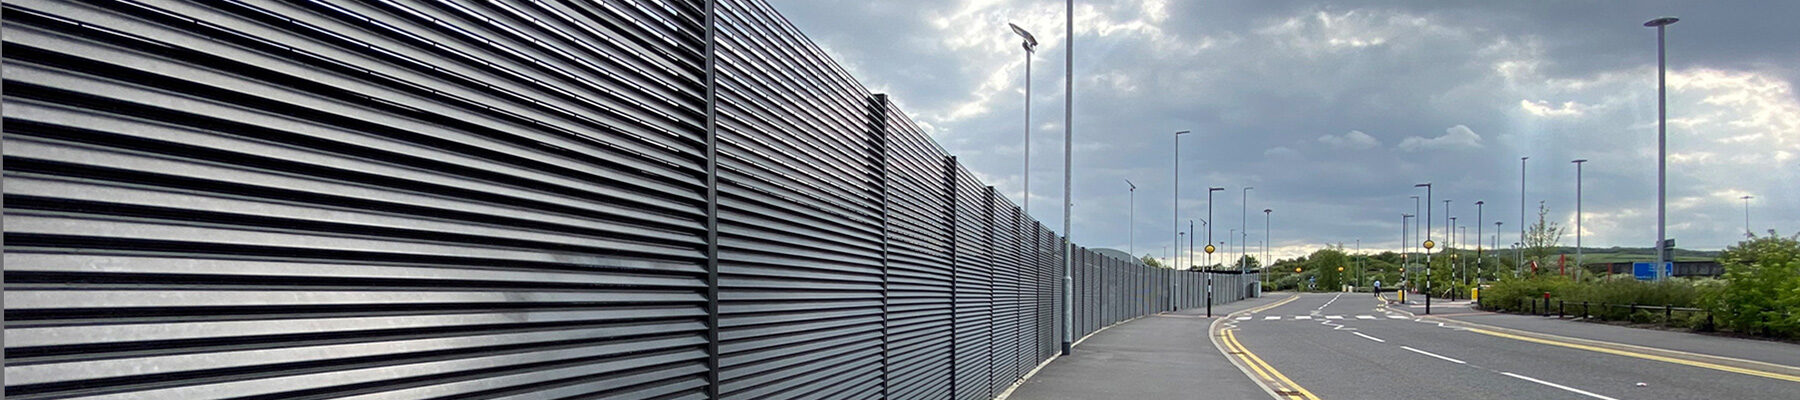 Steel louvred fencing for screening coach park at Leeds United Football Club